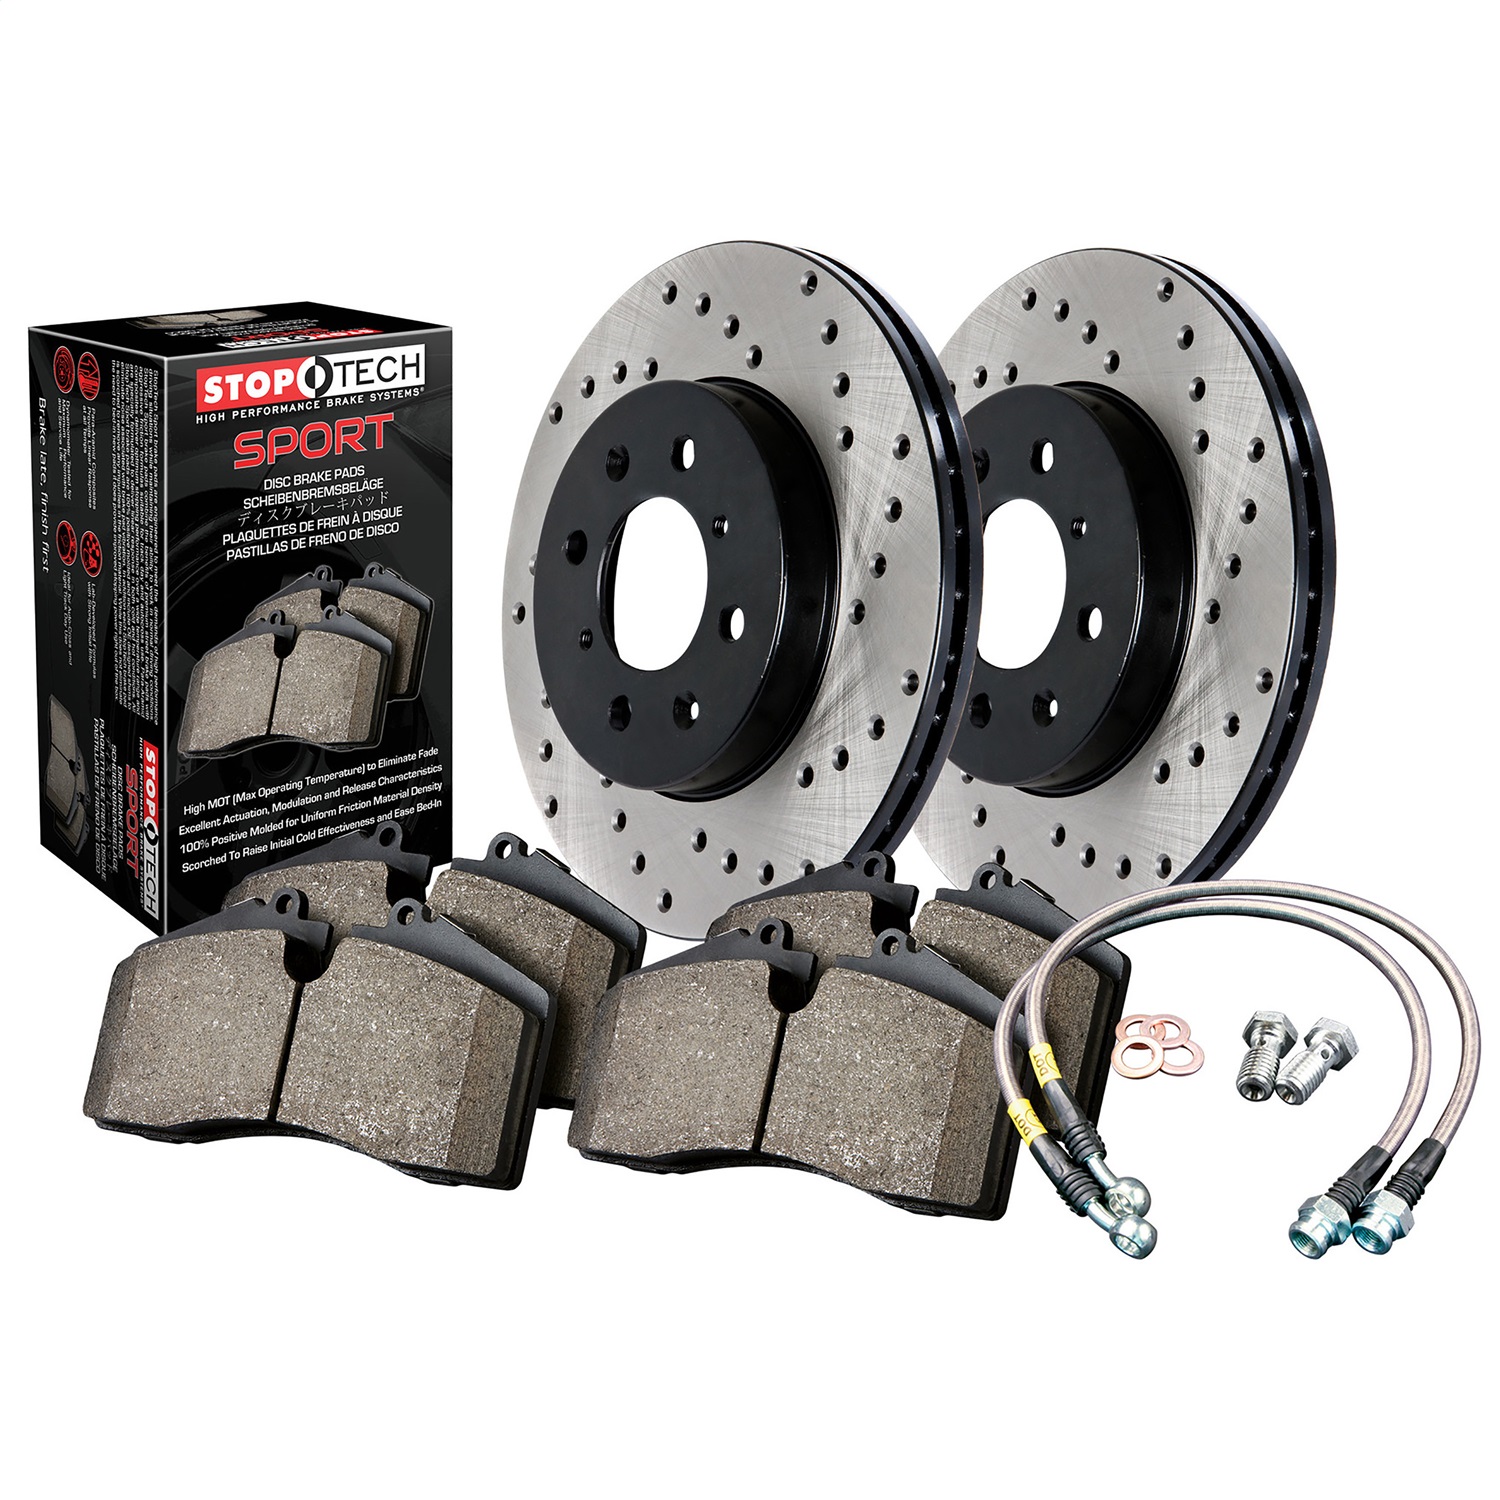 StopTech 979.61003R Sport Disc Brake Kit w/Cross-Drilled Rotor Fits Mustang